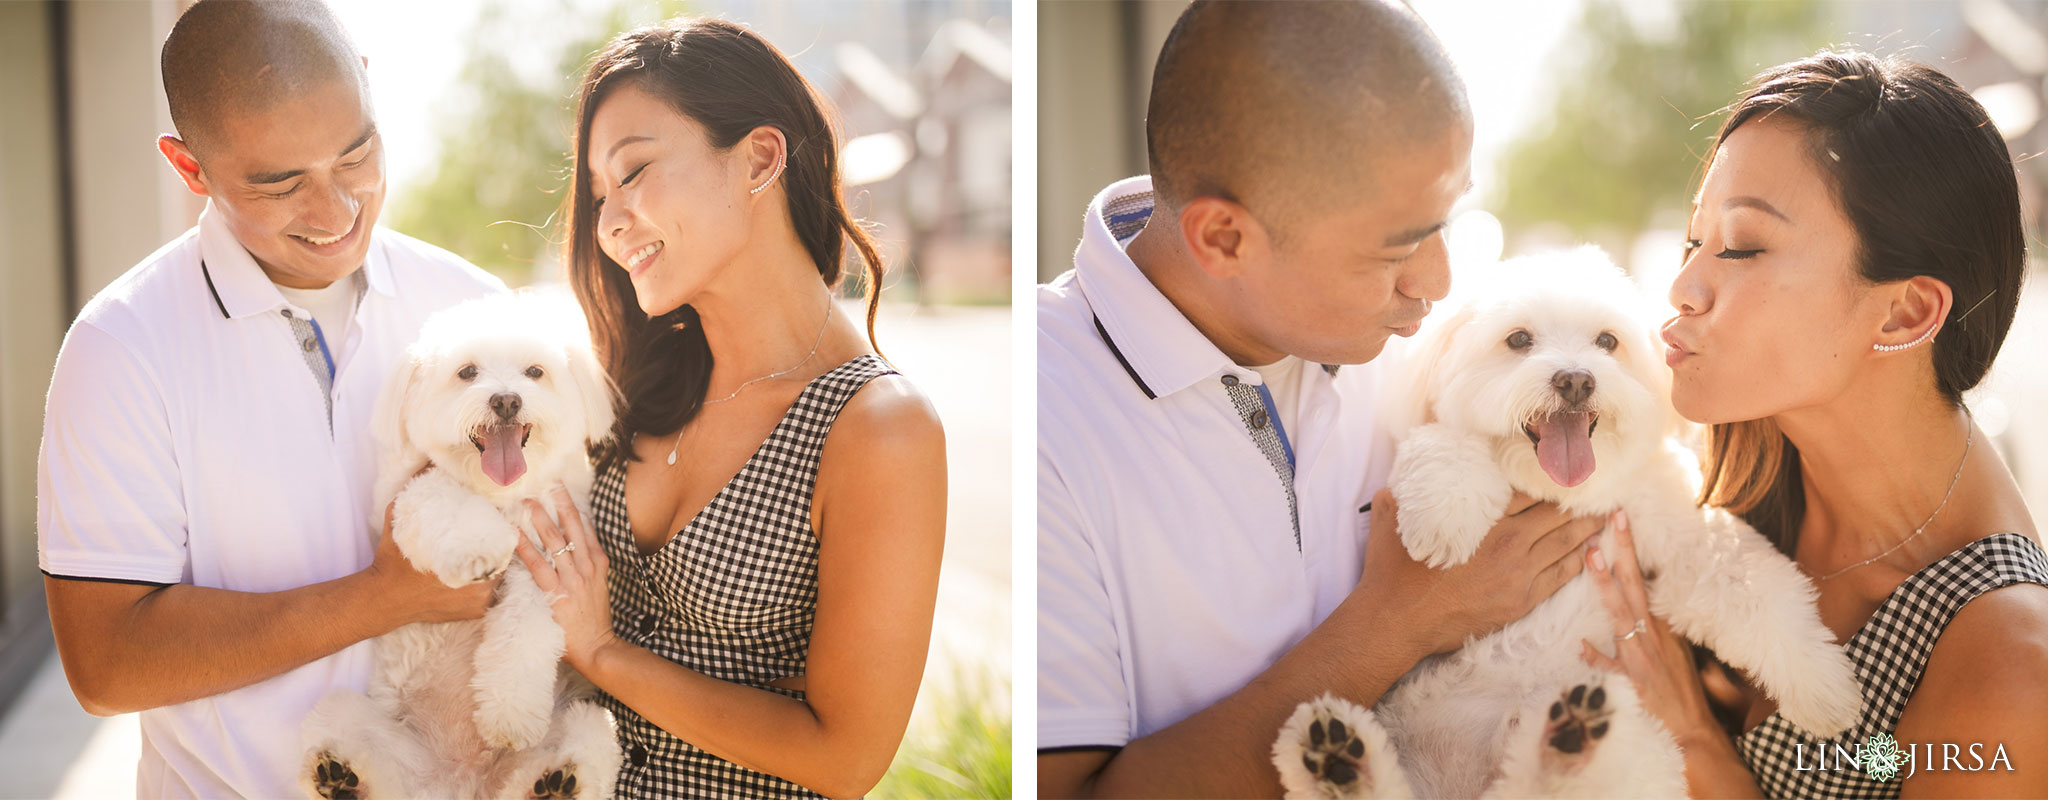 02 downtown los angeles dog engagement photography